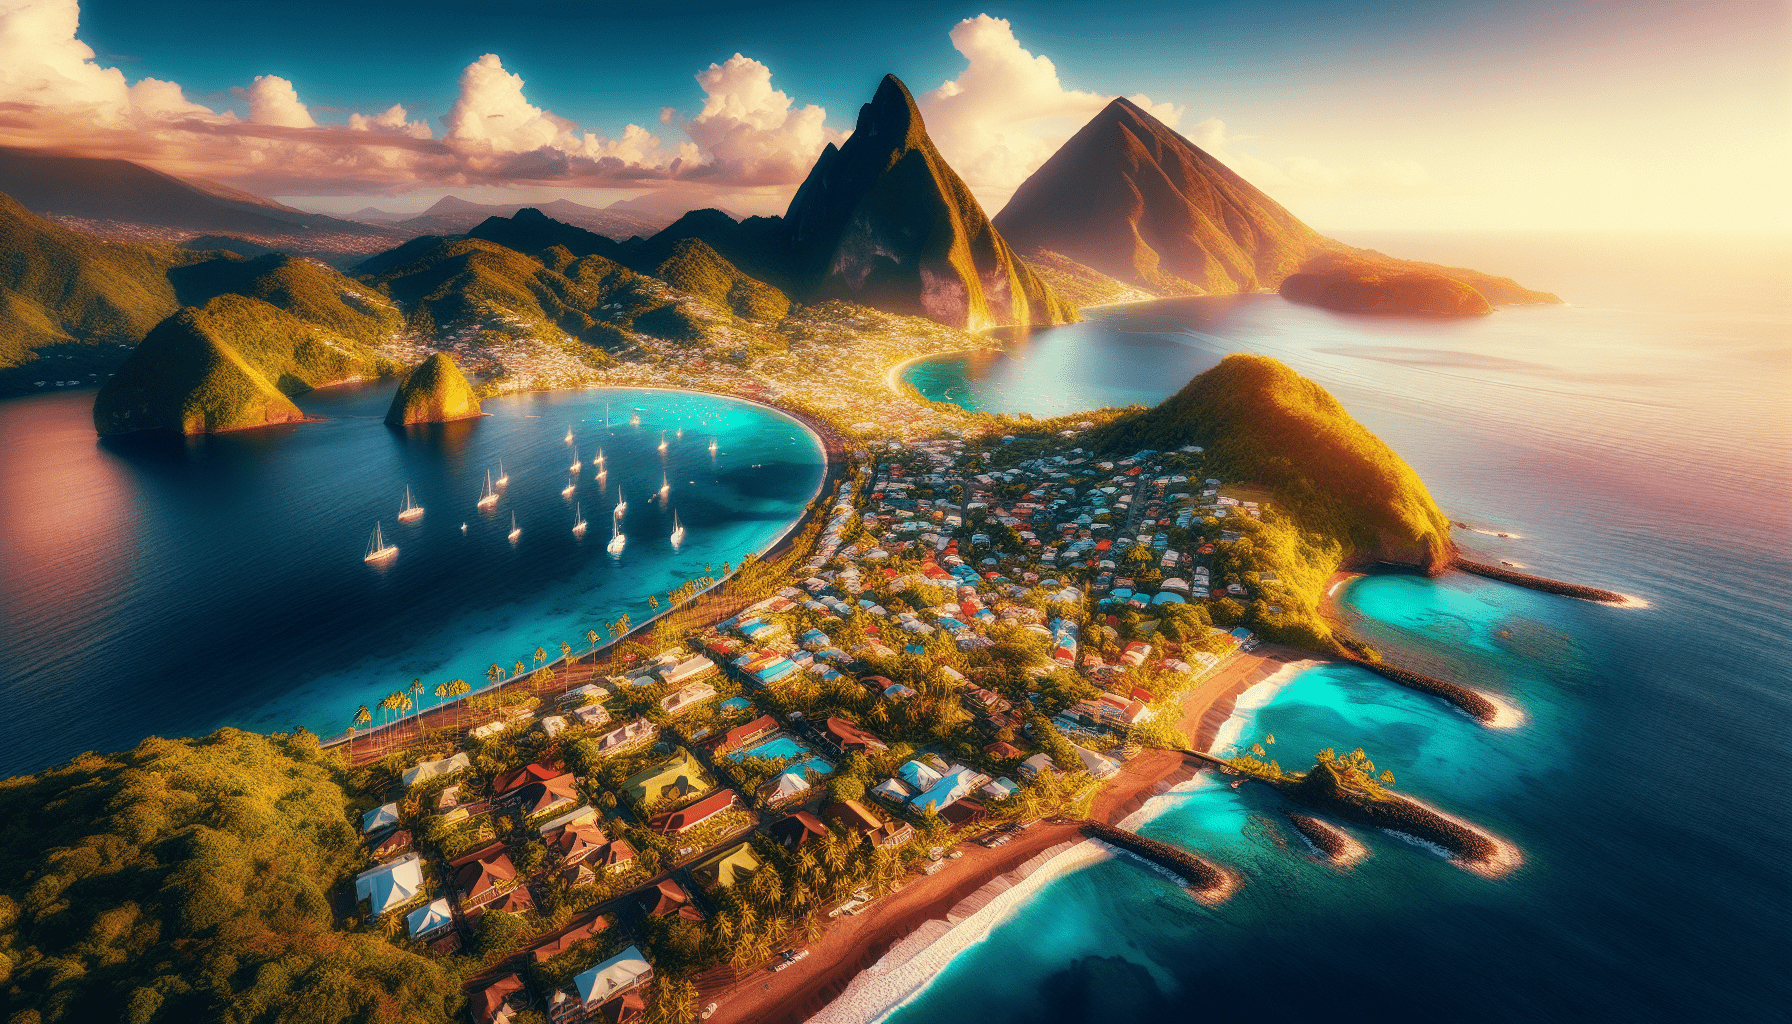 What Other Islands Are Close To St Lucia?